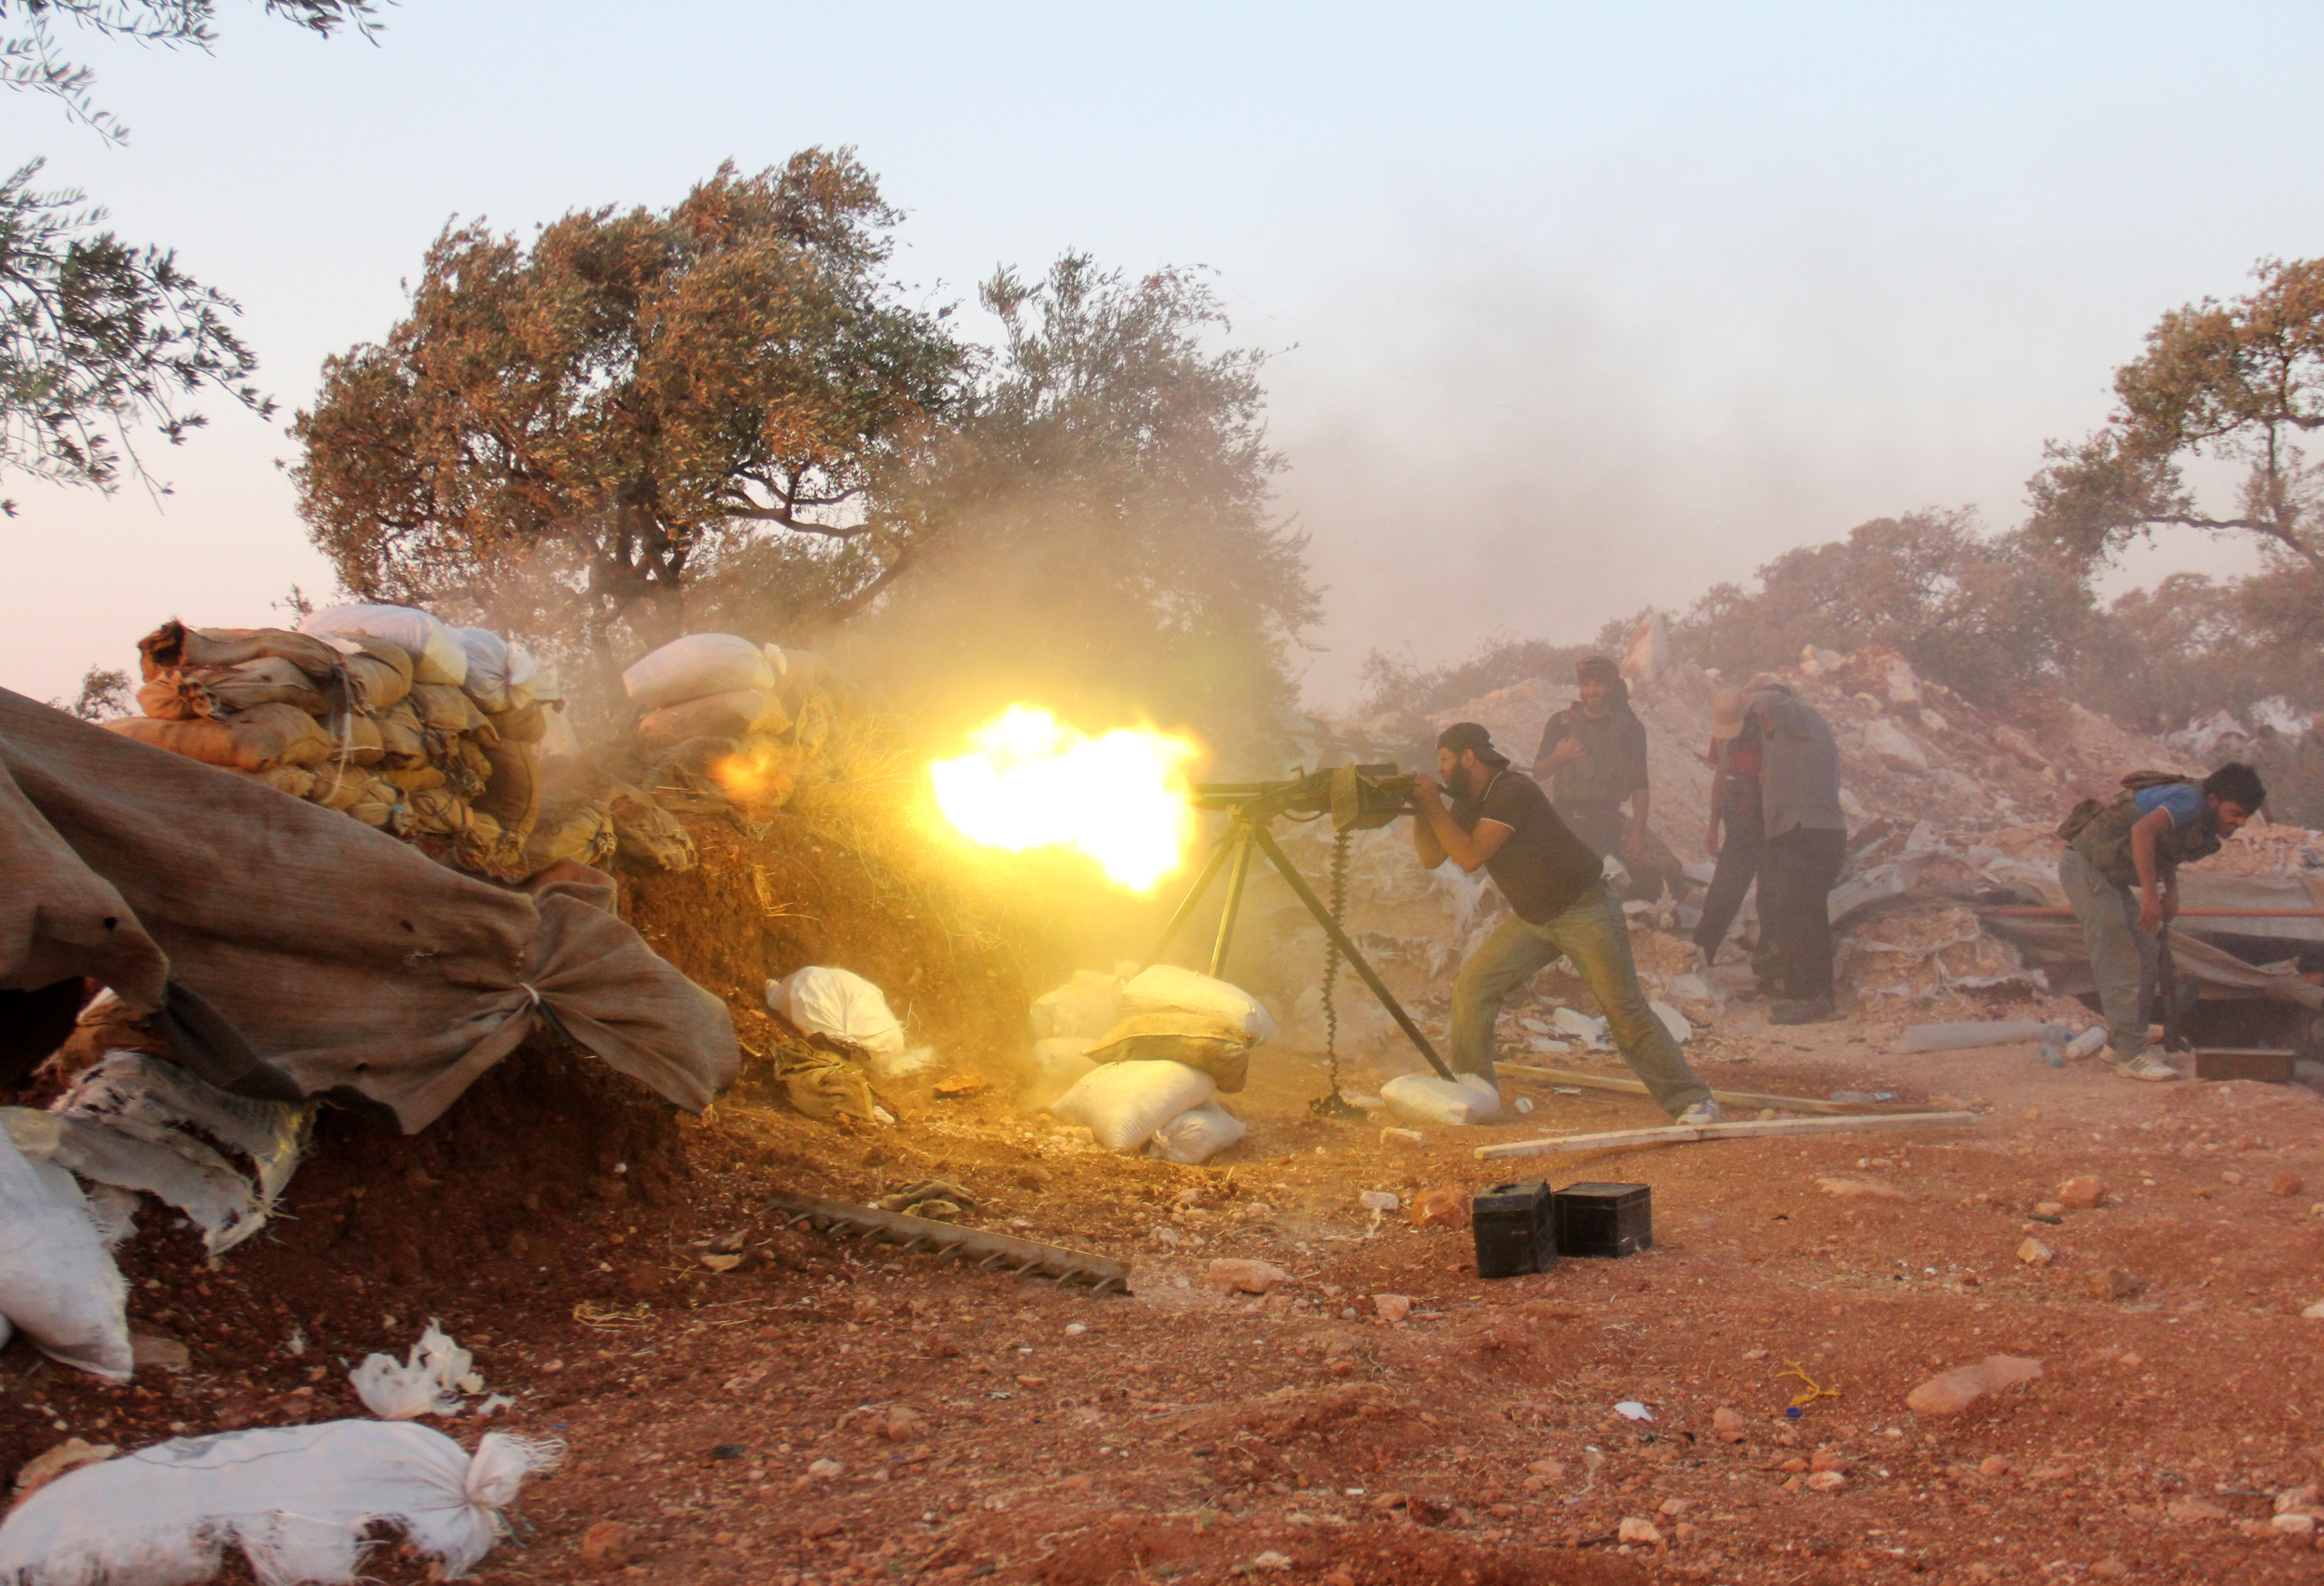 A rebel fighter fires a heavy machine gun during clashes with government forces and pro-regime shabiha militiamen in the outskirts of Syria's northwestern Idlib province on September 18, 2015